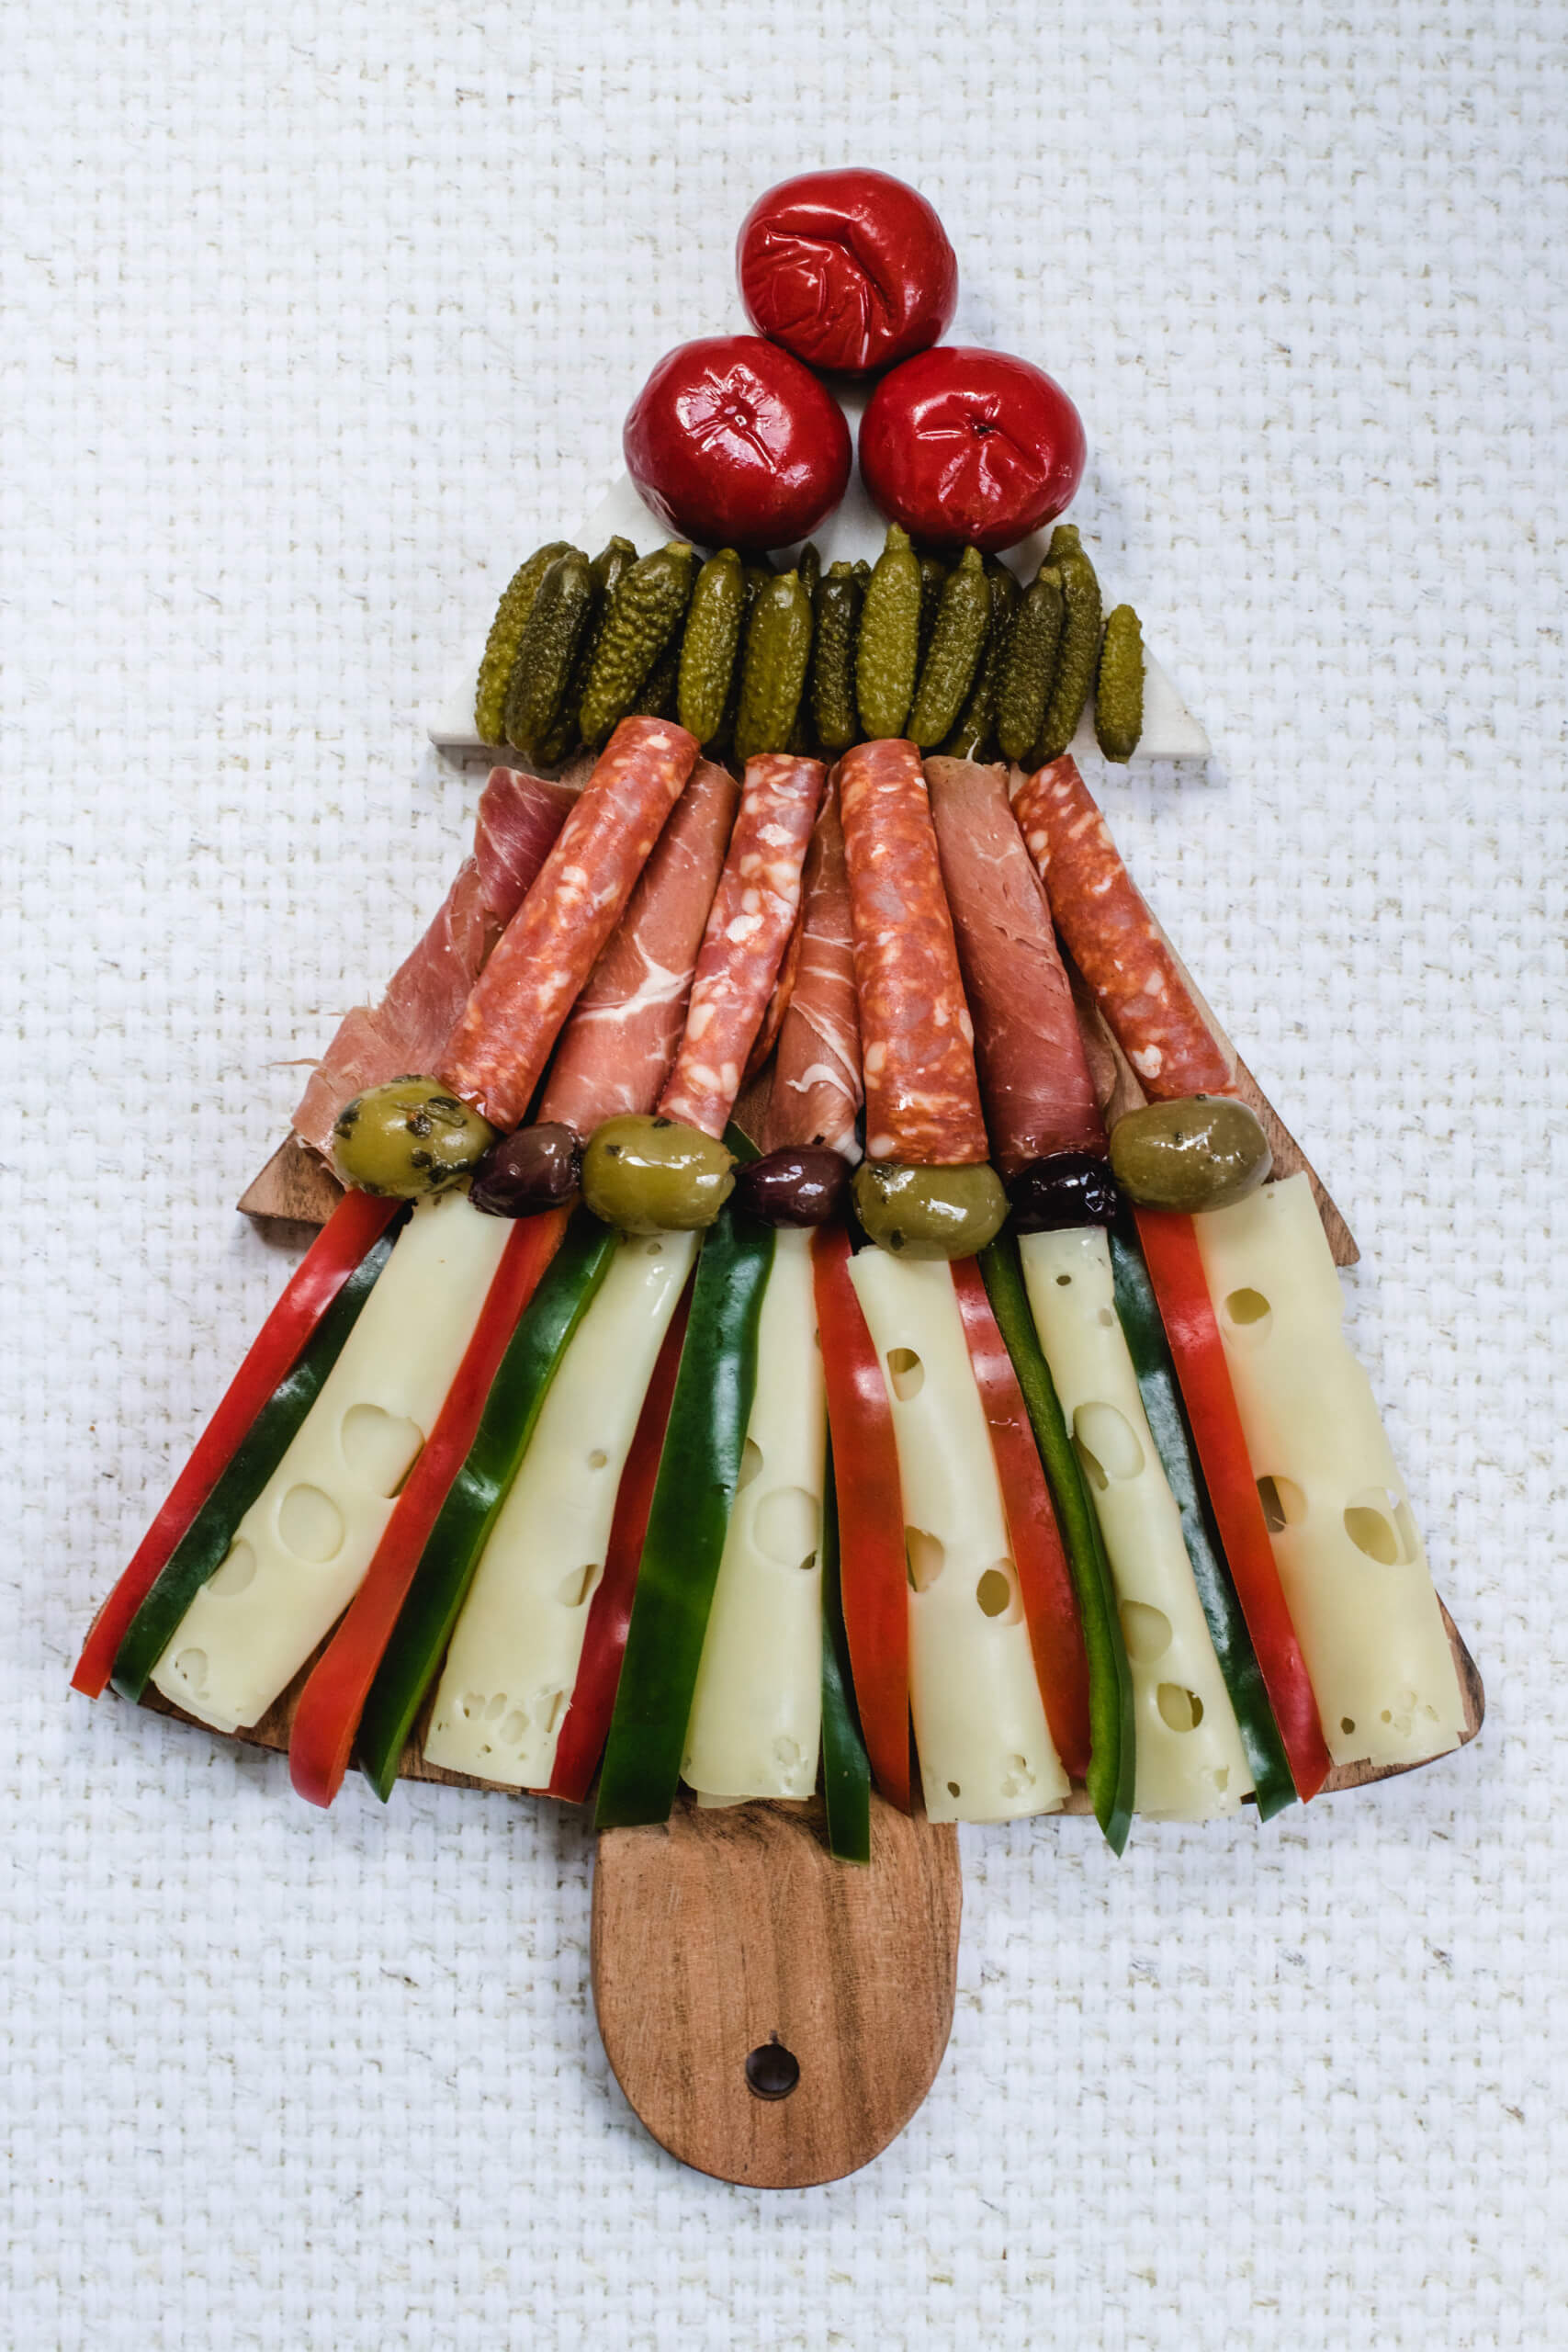 Christmas tree charcuterie board with cheese, capiscum, olives, deli meats, gerkins and stuffed peppers